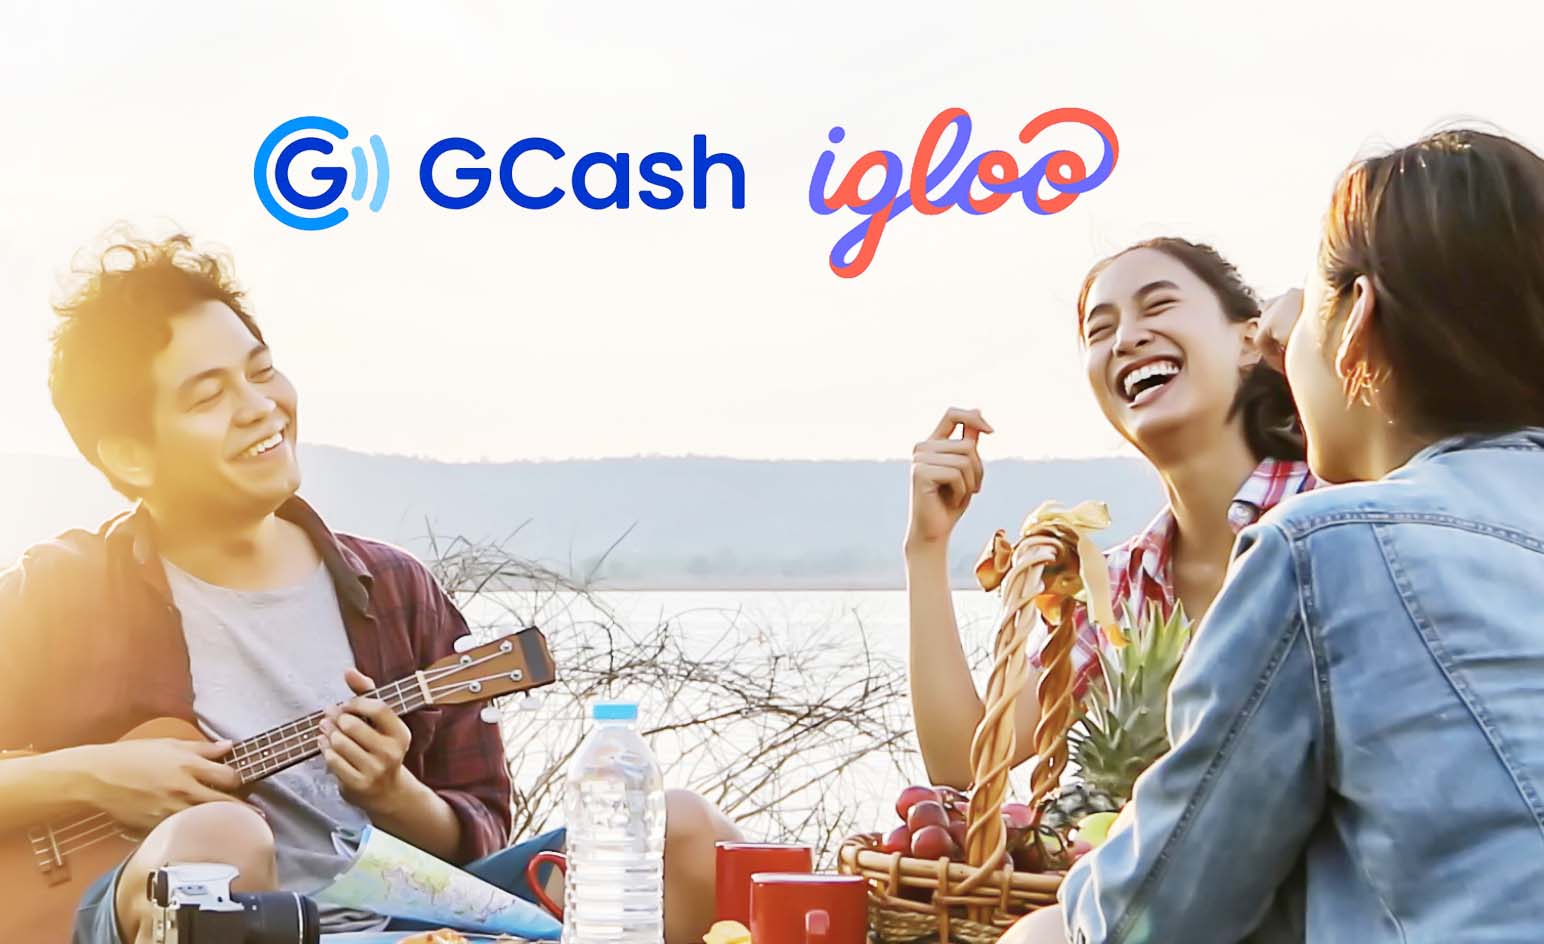 GCash partners Regional insurtech firm, Igloo introducing first of its kind online shopping protection